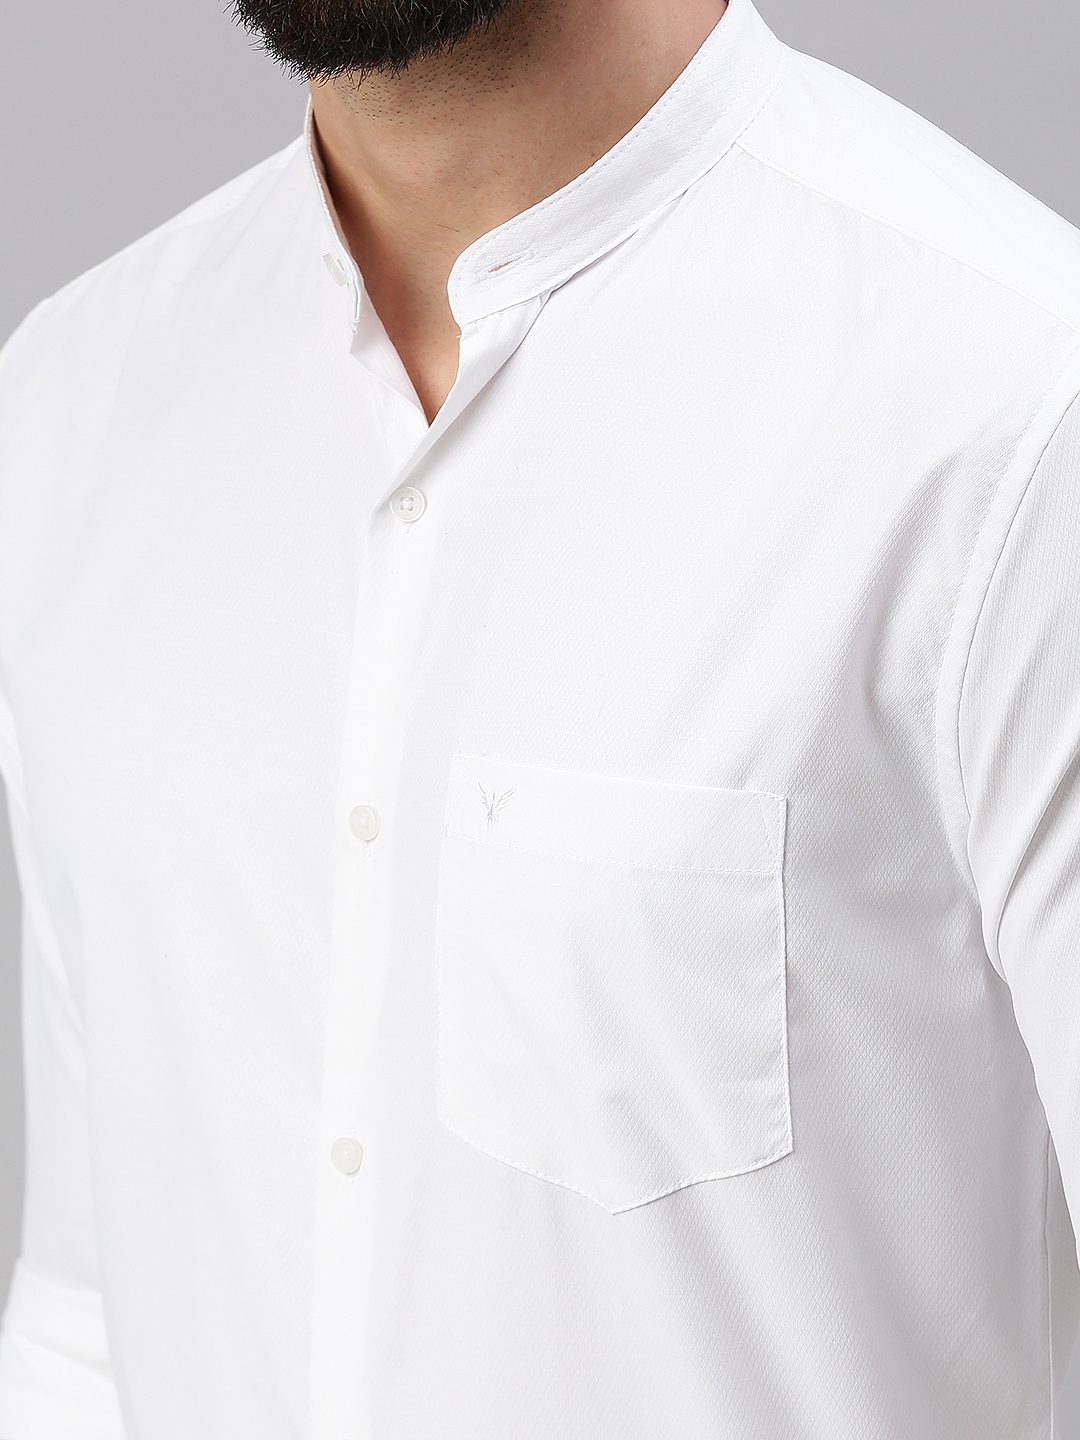 Men's White Polycotton Solid Casual Shirts